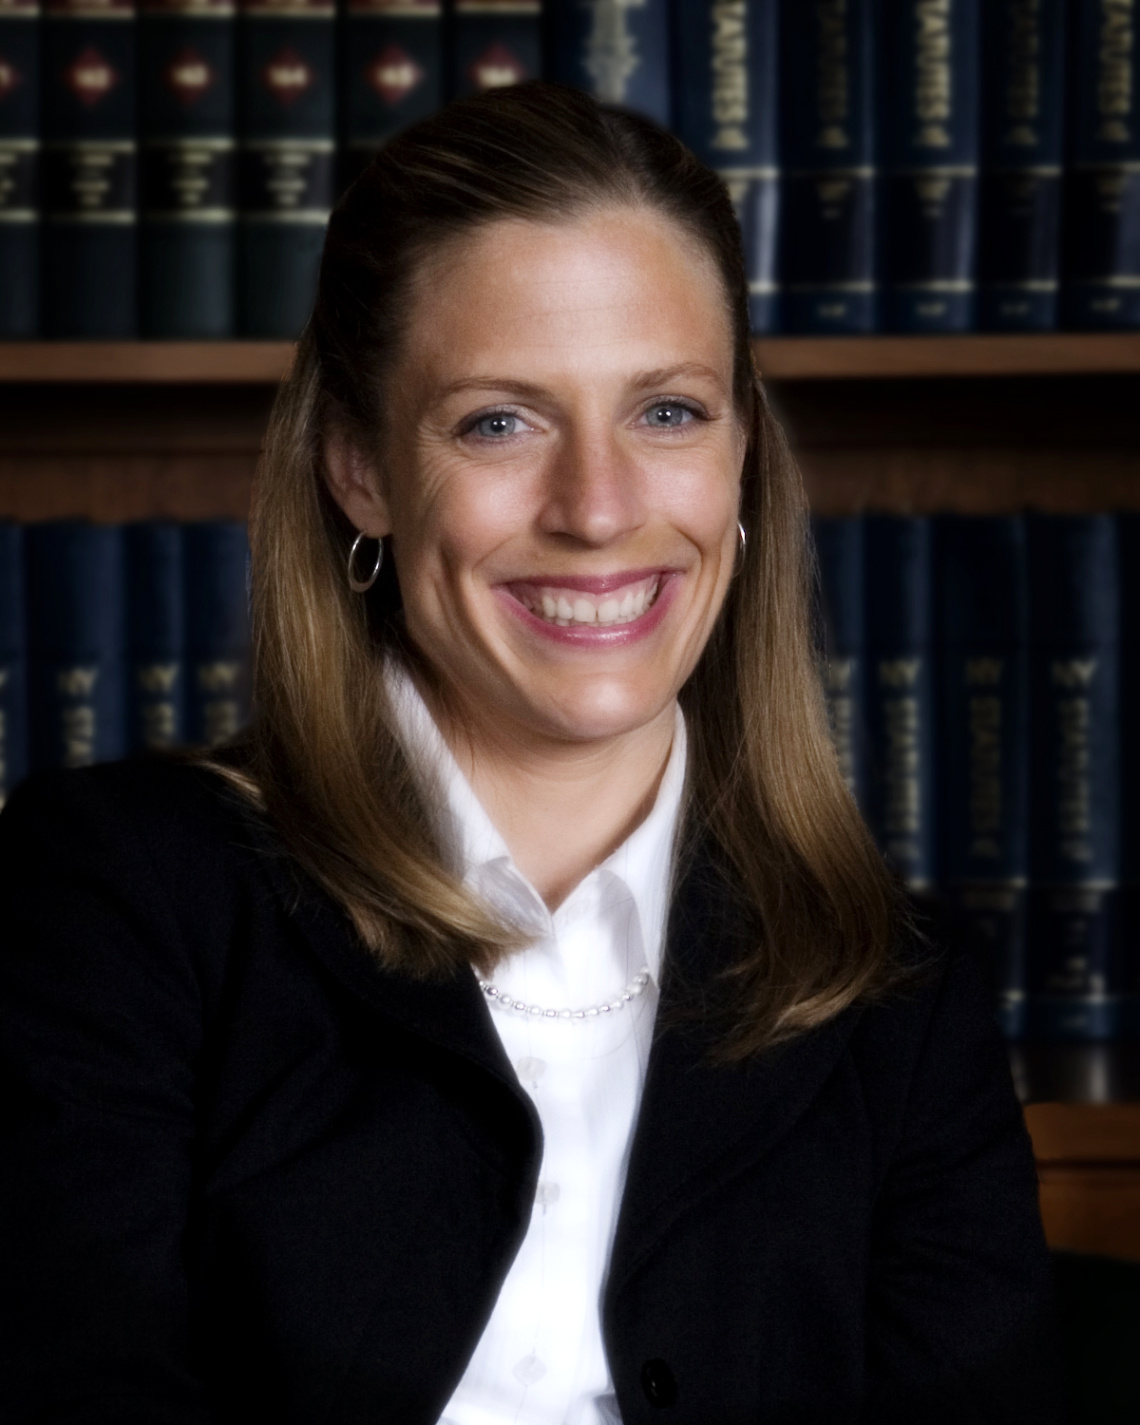 Car Accident Lawyer In Otsego Ny Dans Christina sonsire Recognized for Trial Work In Courtrooms